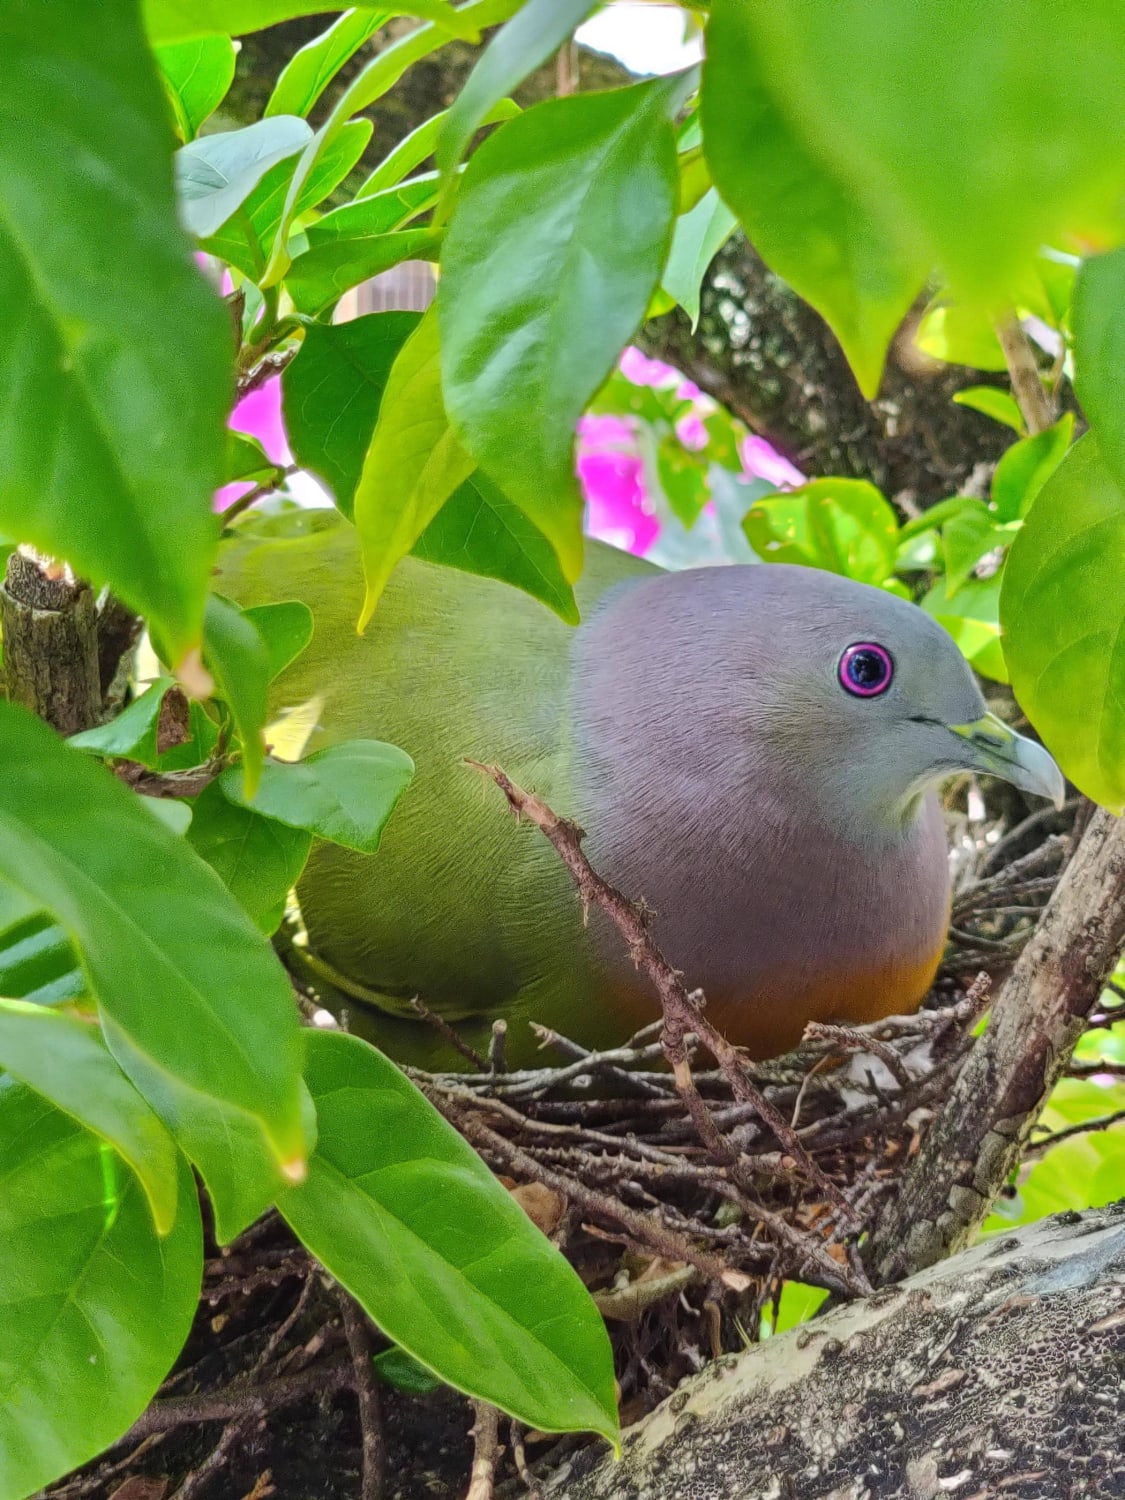 The Pink-necked Green Pigeon, locally known as Burung Punai, in Malaysia